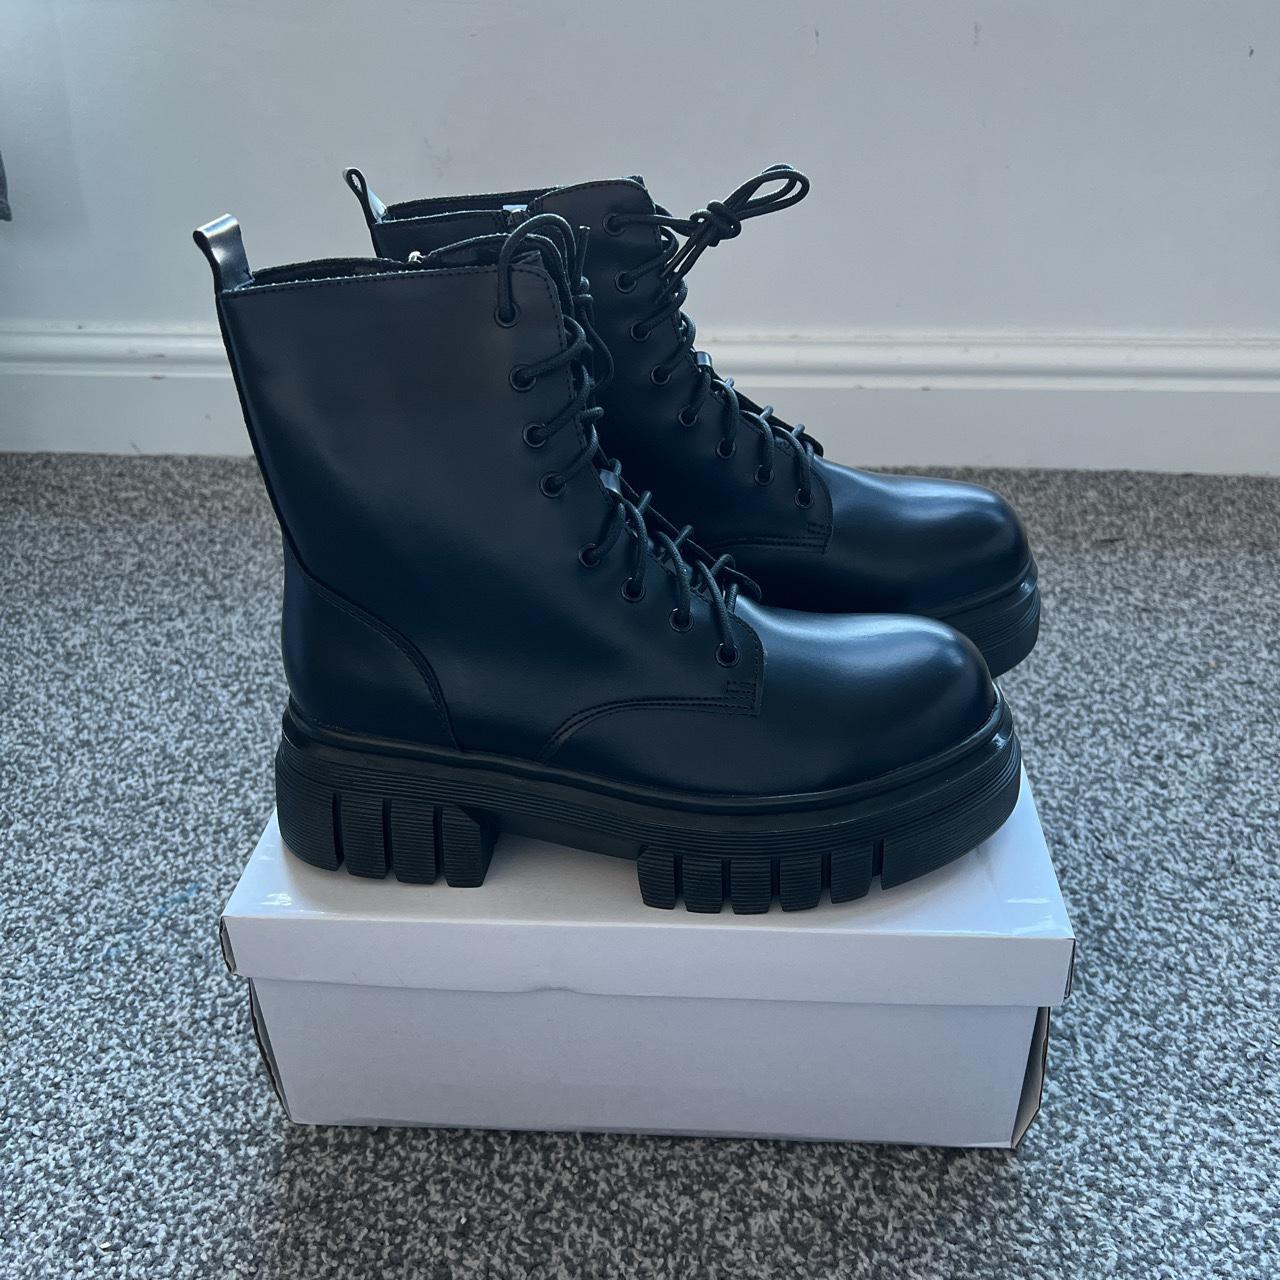 Black Chunky Platform Ankle Boots Lace up front and... - Depop